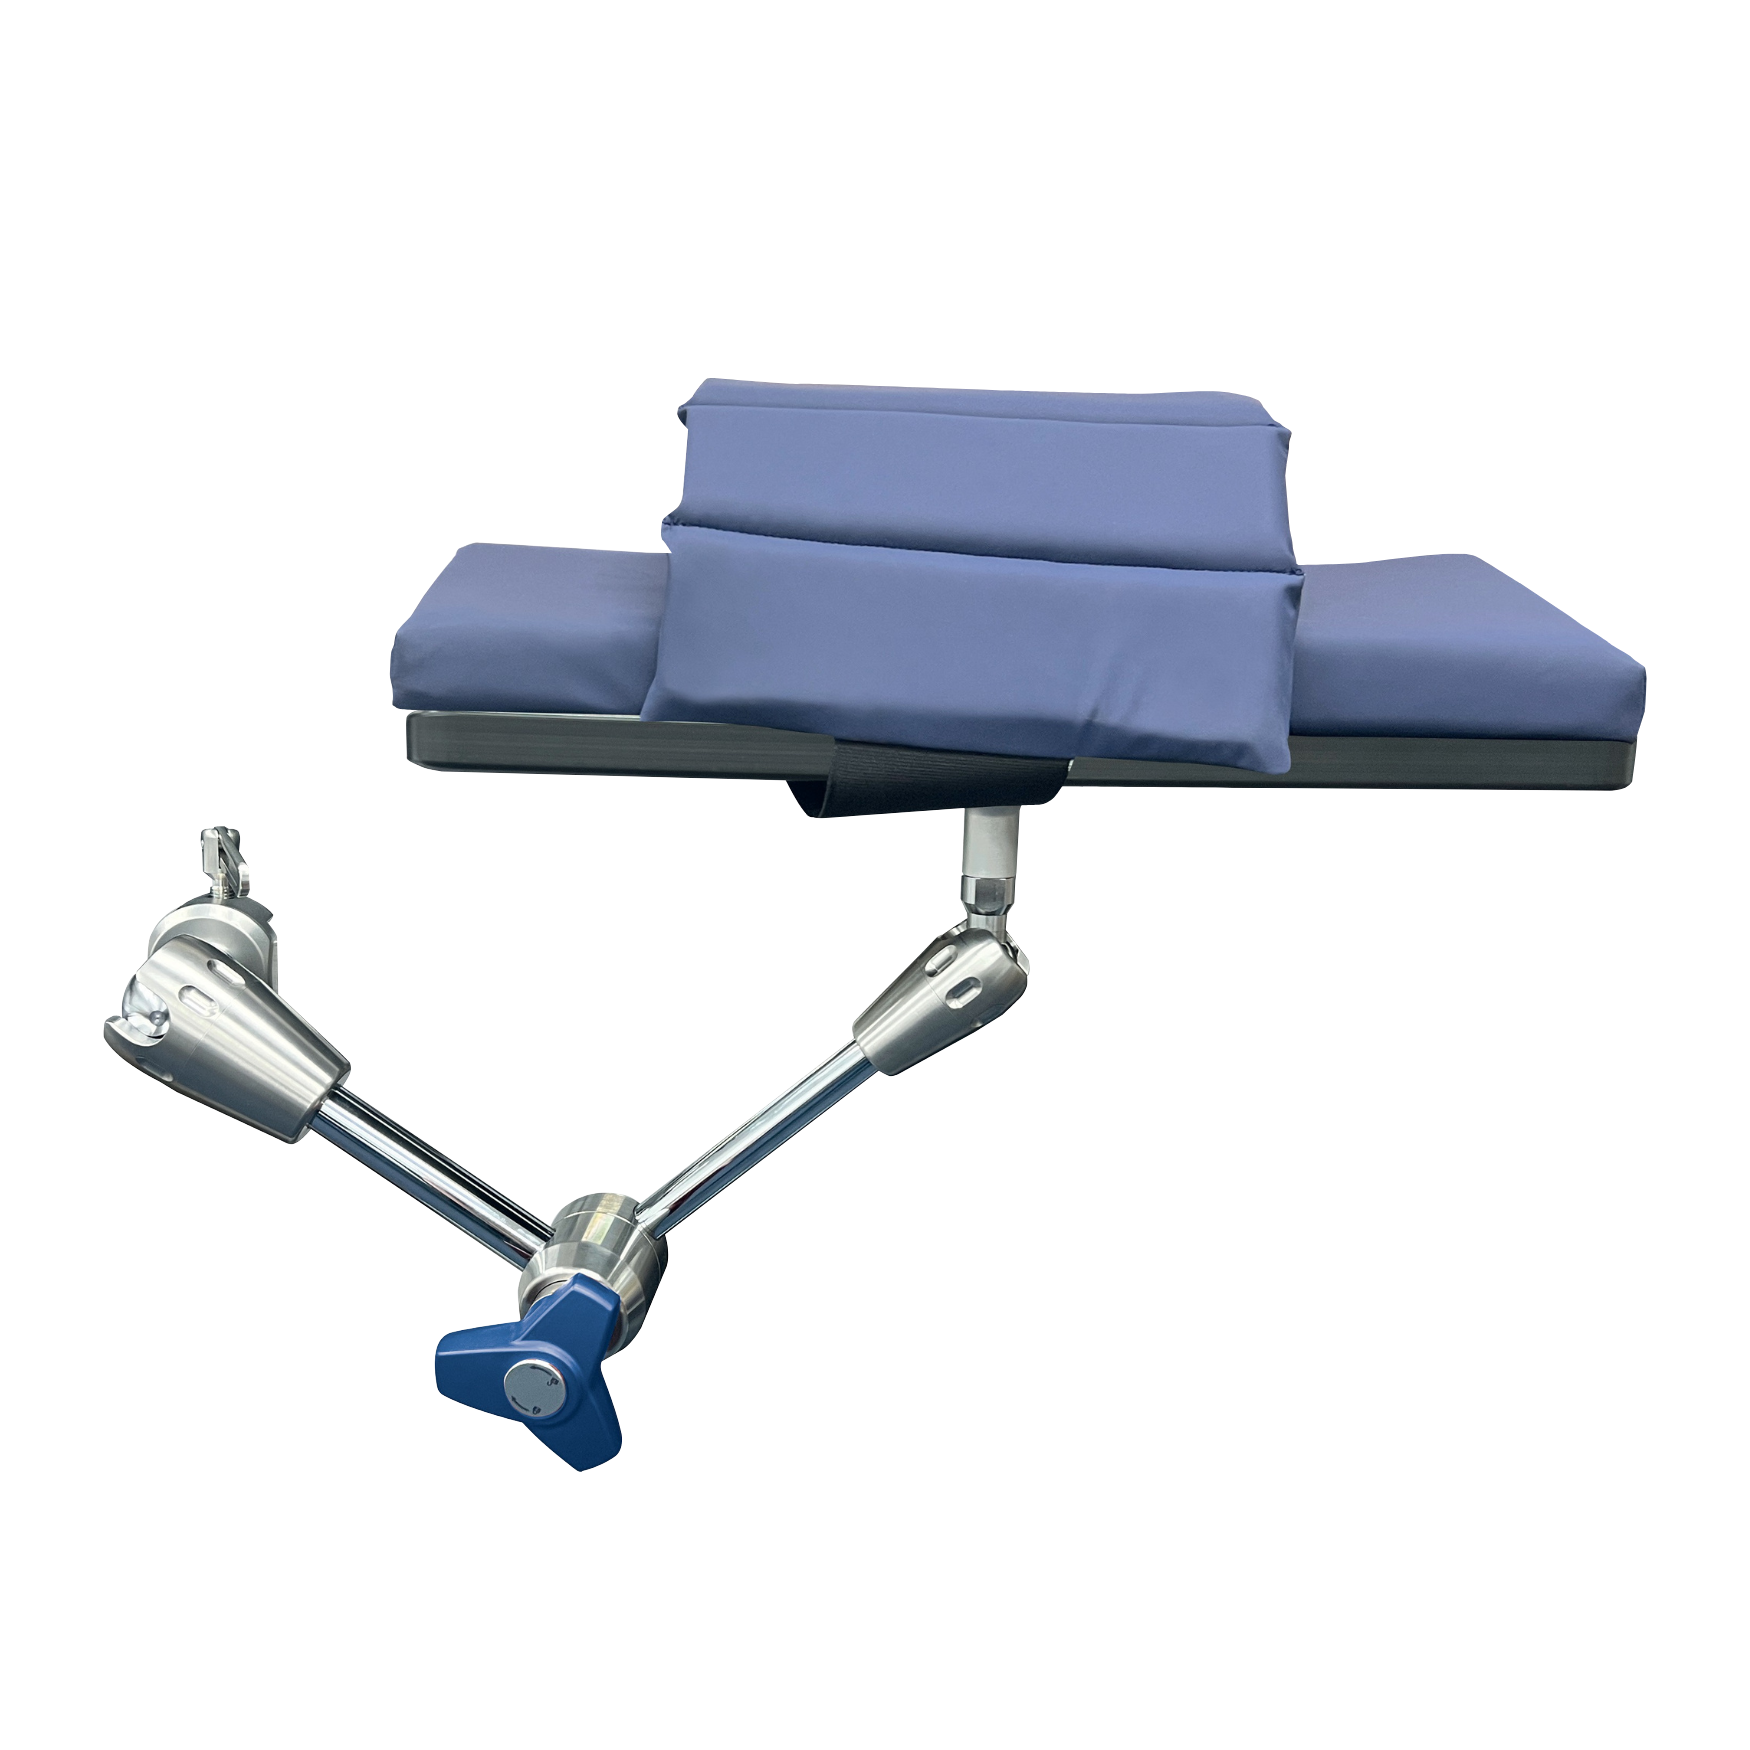 Lateral Support - Surgical Table Accessories - Future Health Concepts